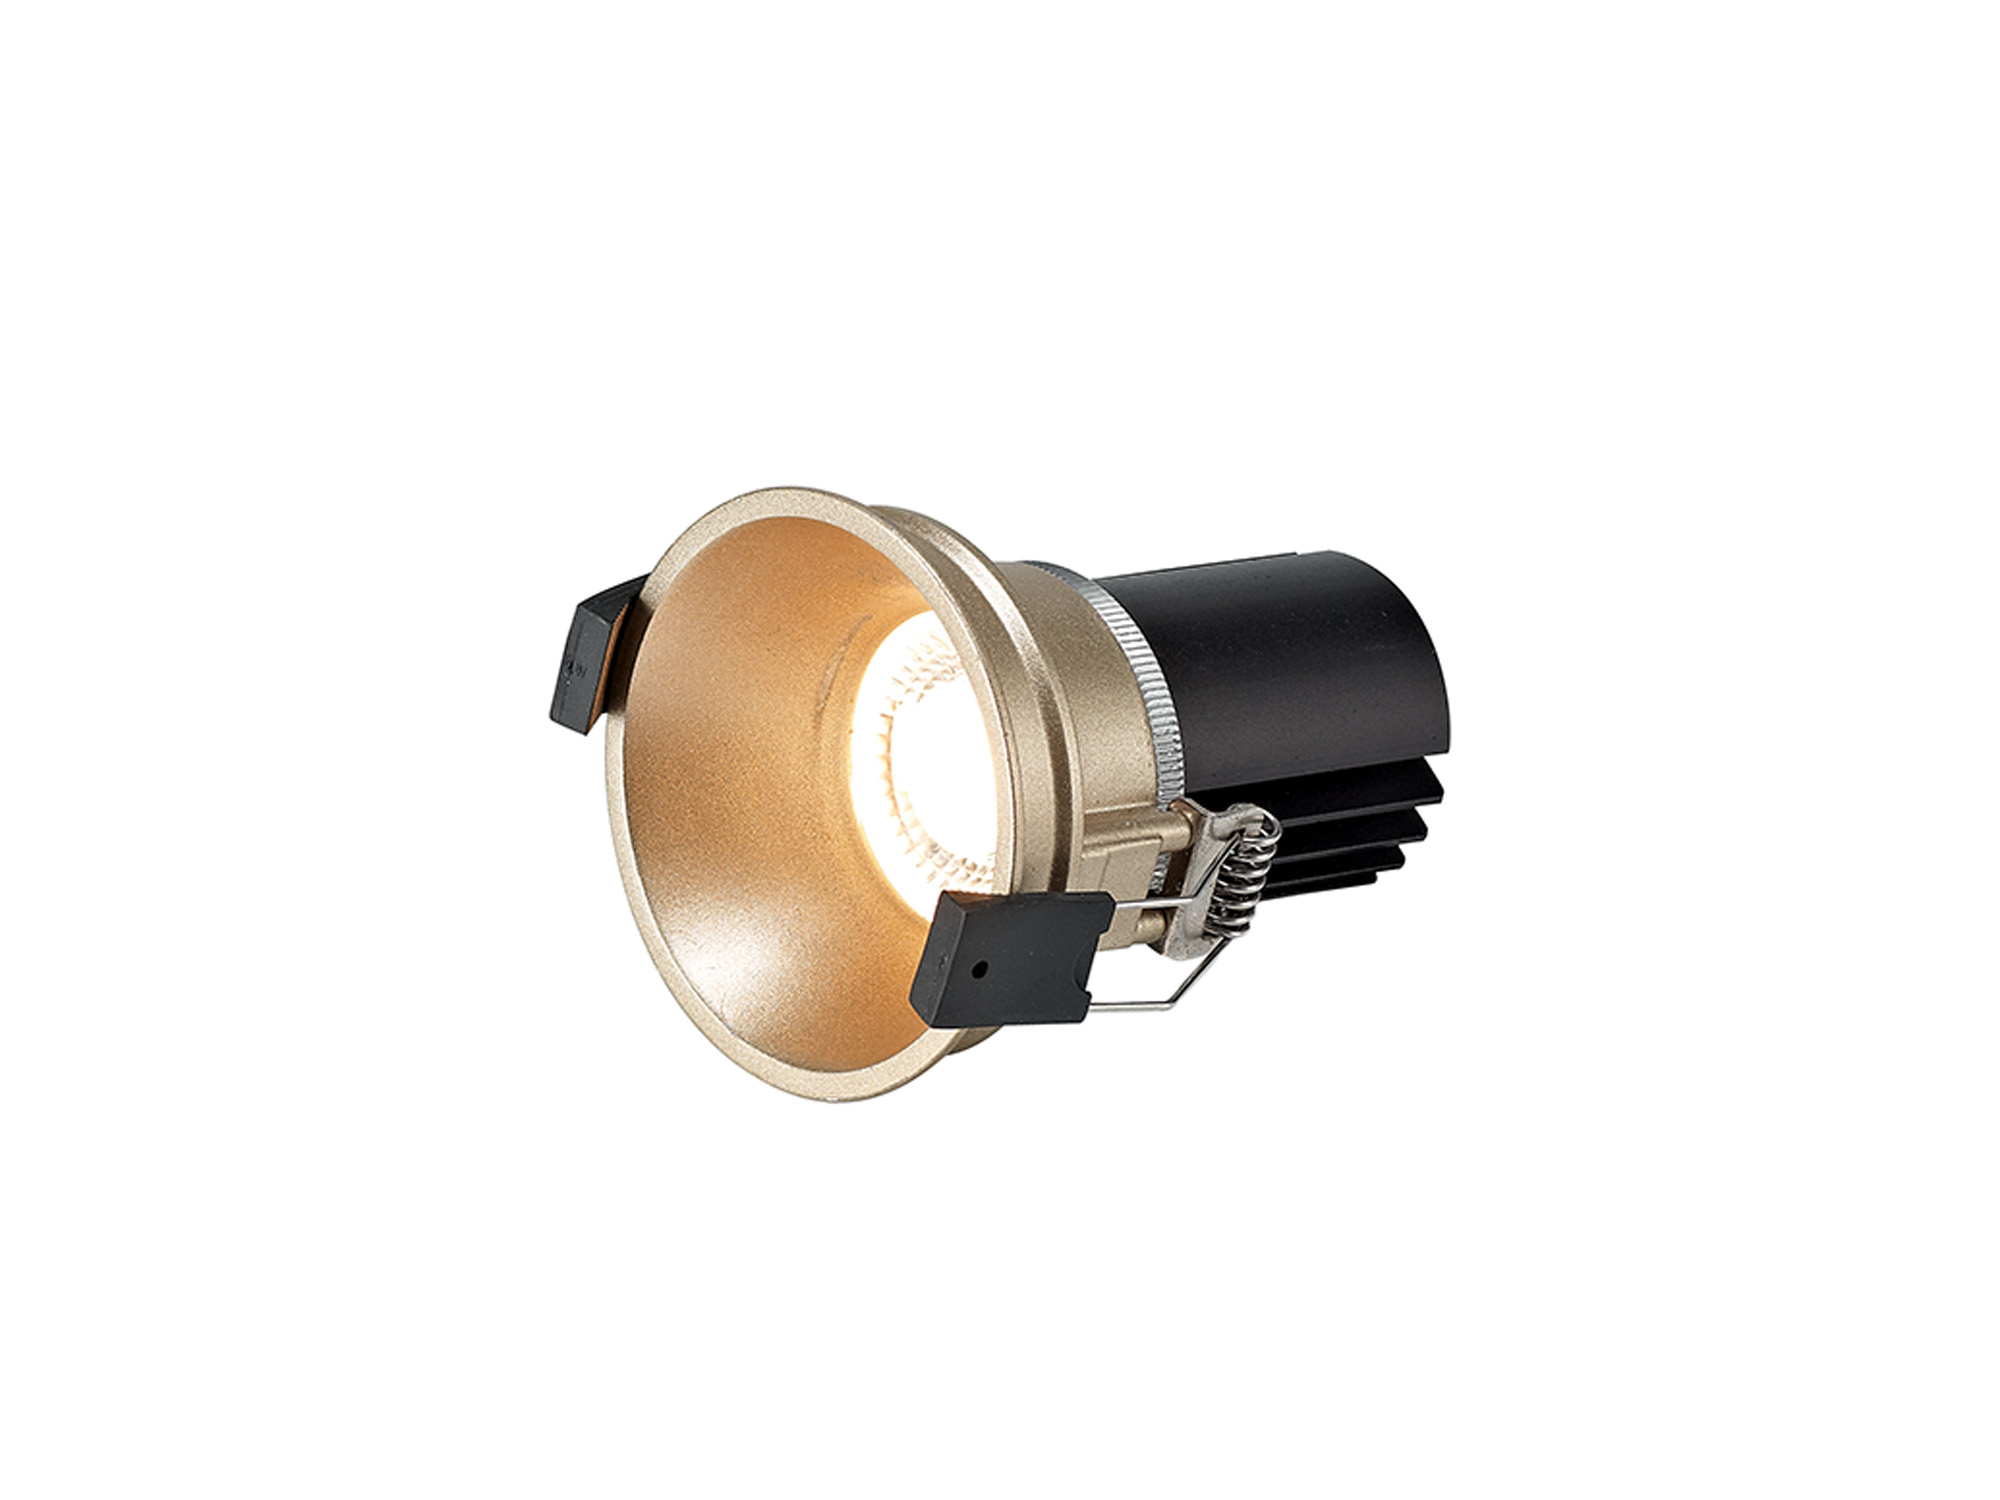 DM201711  Bania 12 Powered by Tridonic  12W 2700K 1200lm 12° CRI>90 LED Engine, 350mA Gold Fixed Recessed Spotlight, IP20